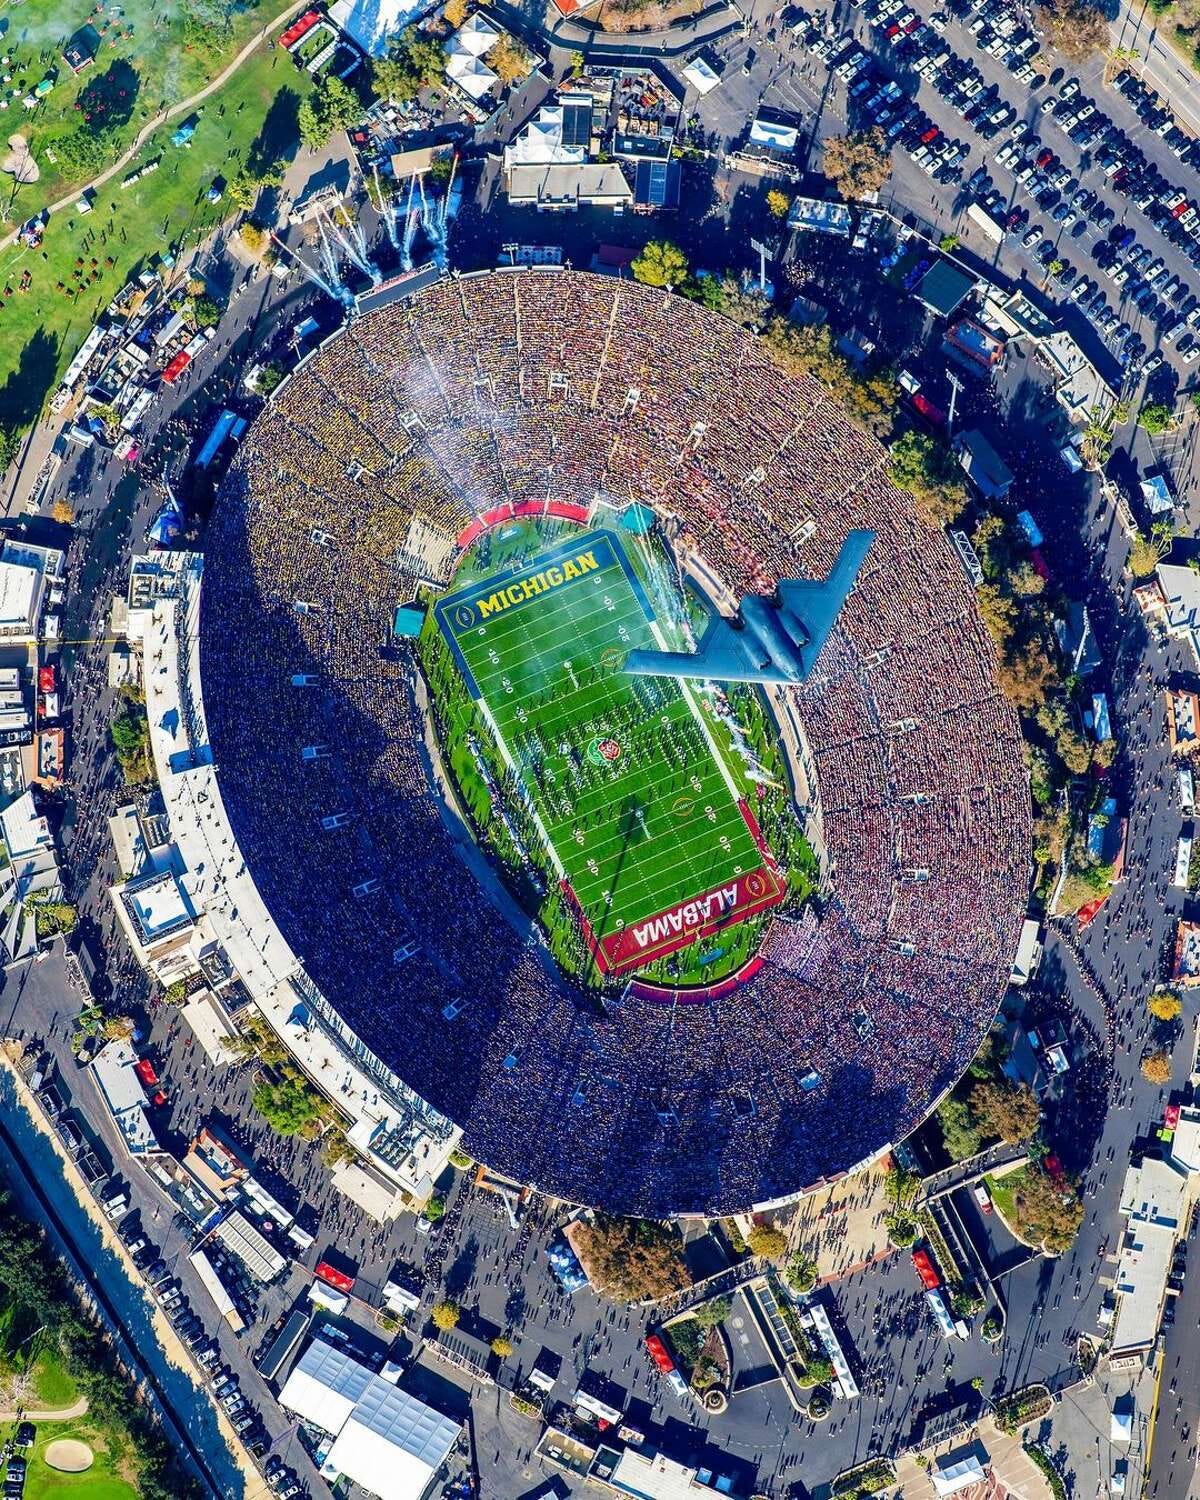 Stealth bomber Rose Bowl flyover captured by Michigan photographer